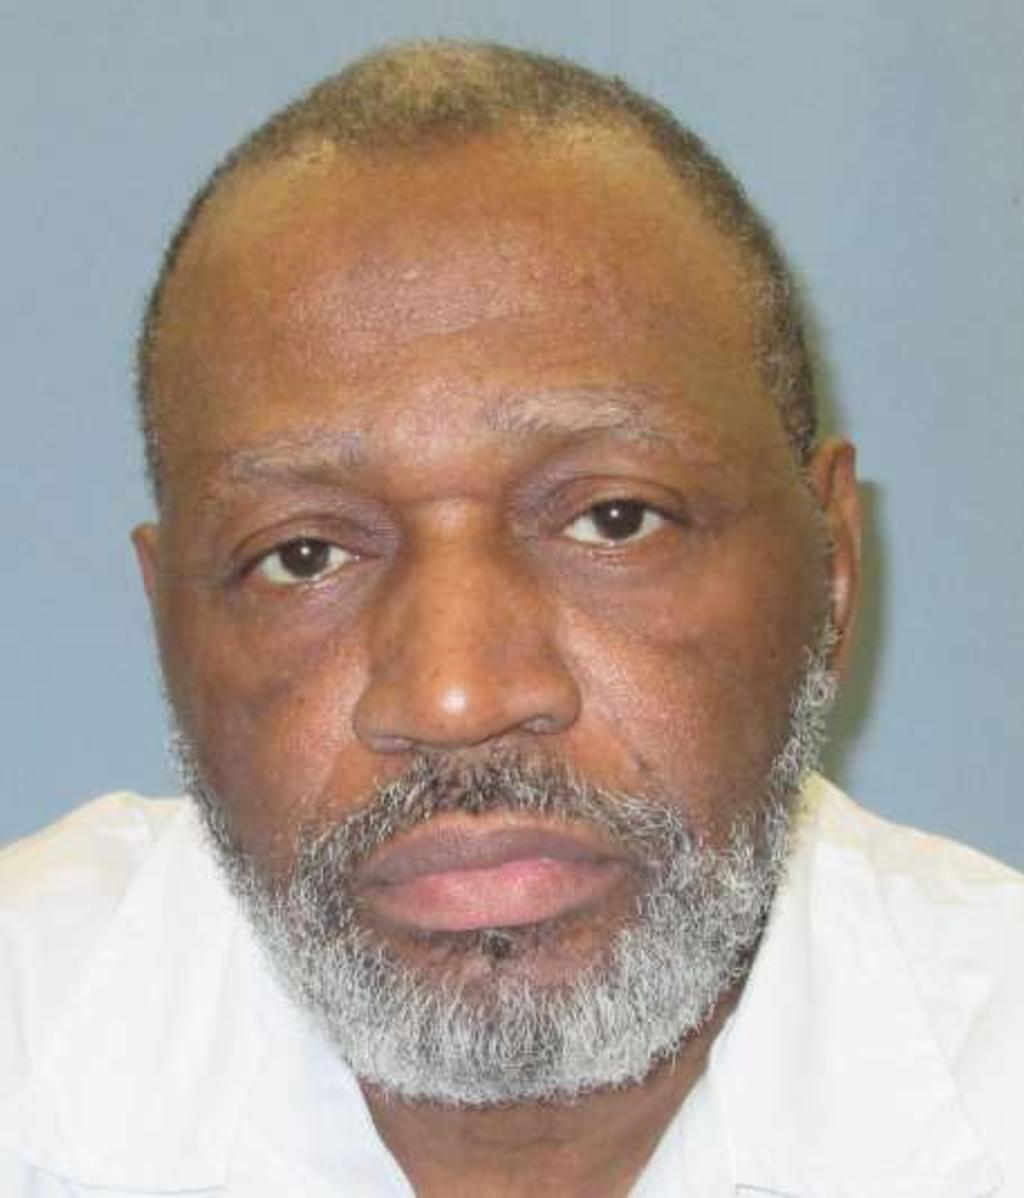 U.S. Supreme Court to Decide if Alabama Can Execute Prisoner With Vascular Dementia and No Memory of the Crime